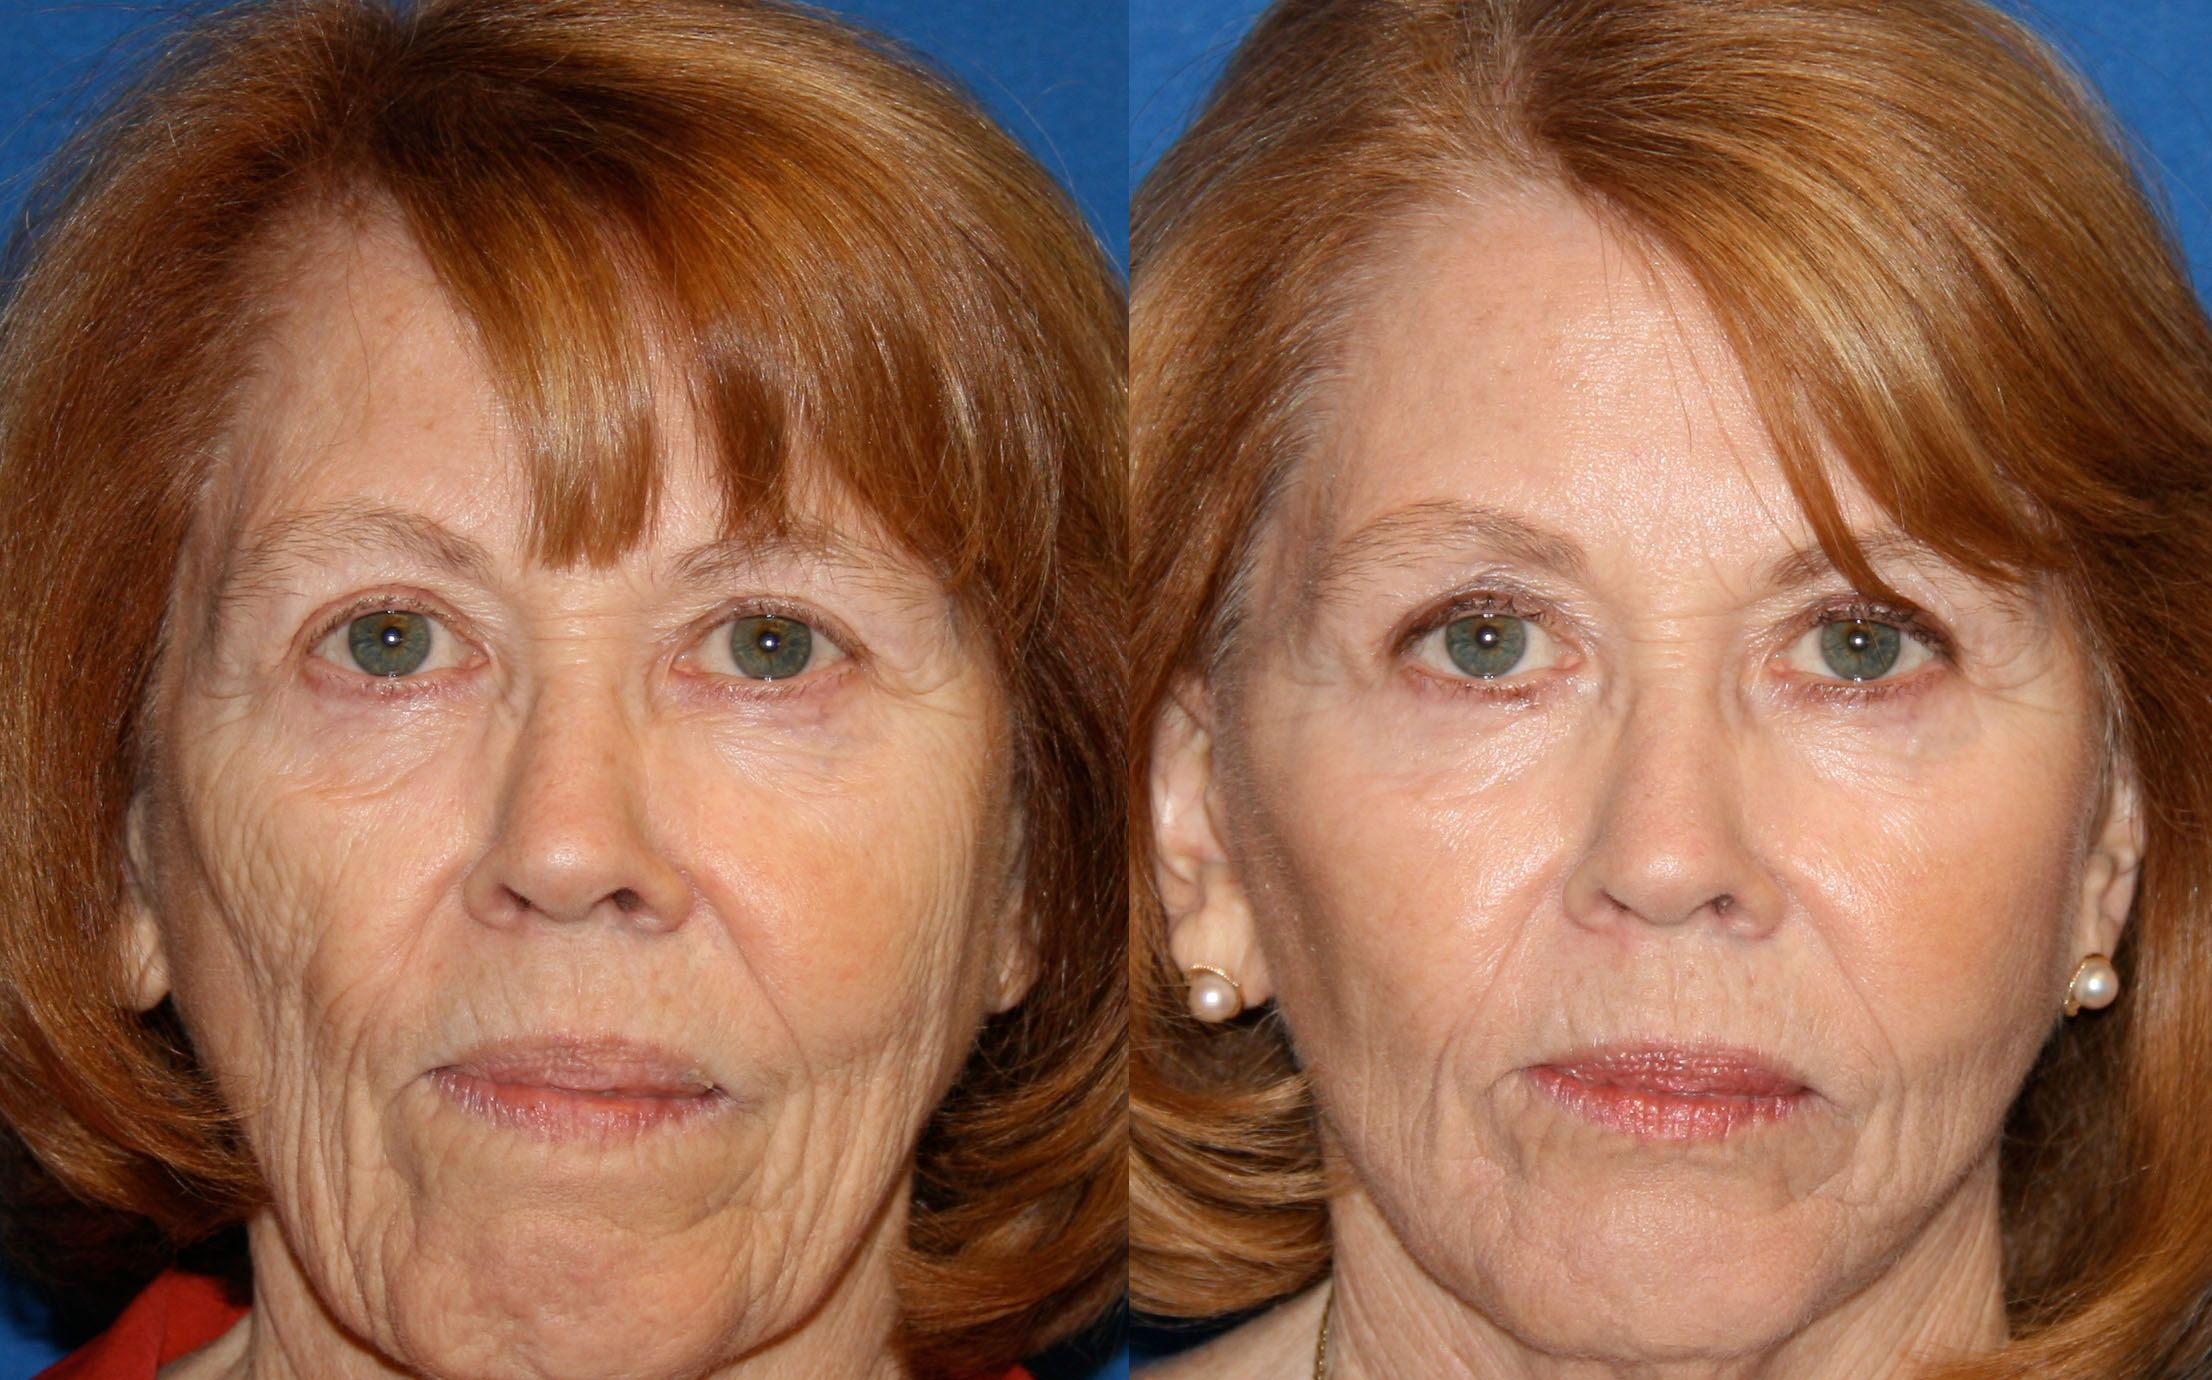 Tailgate reccomend Facial fat grafts injections